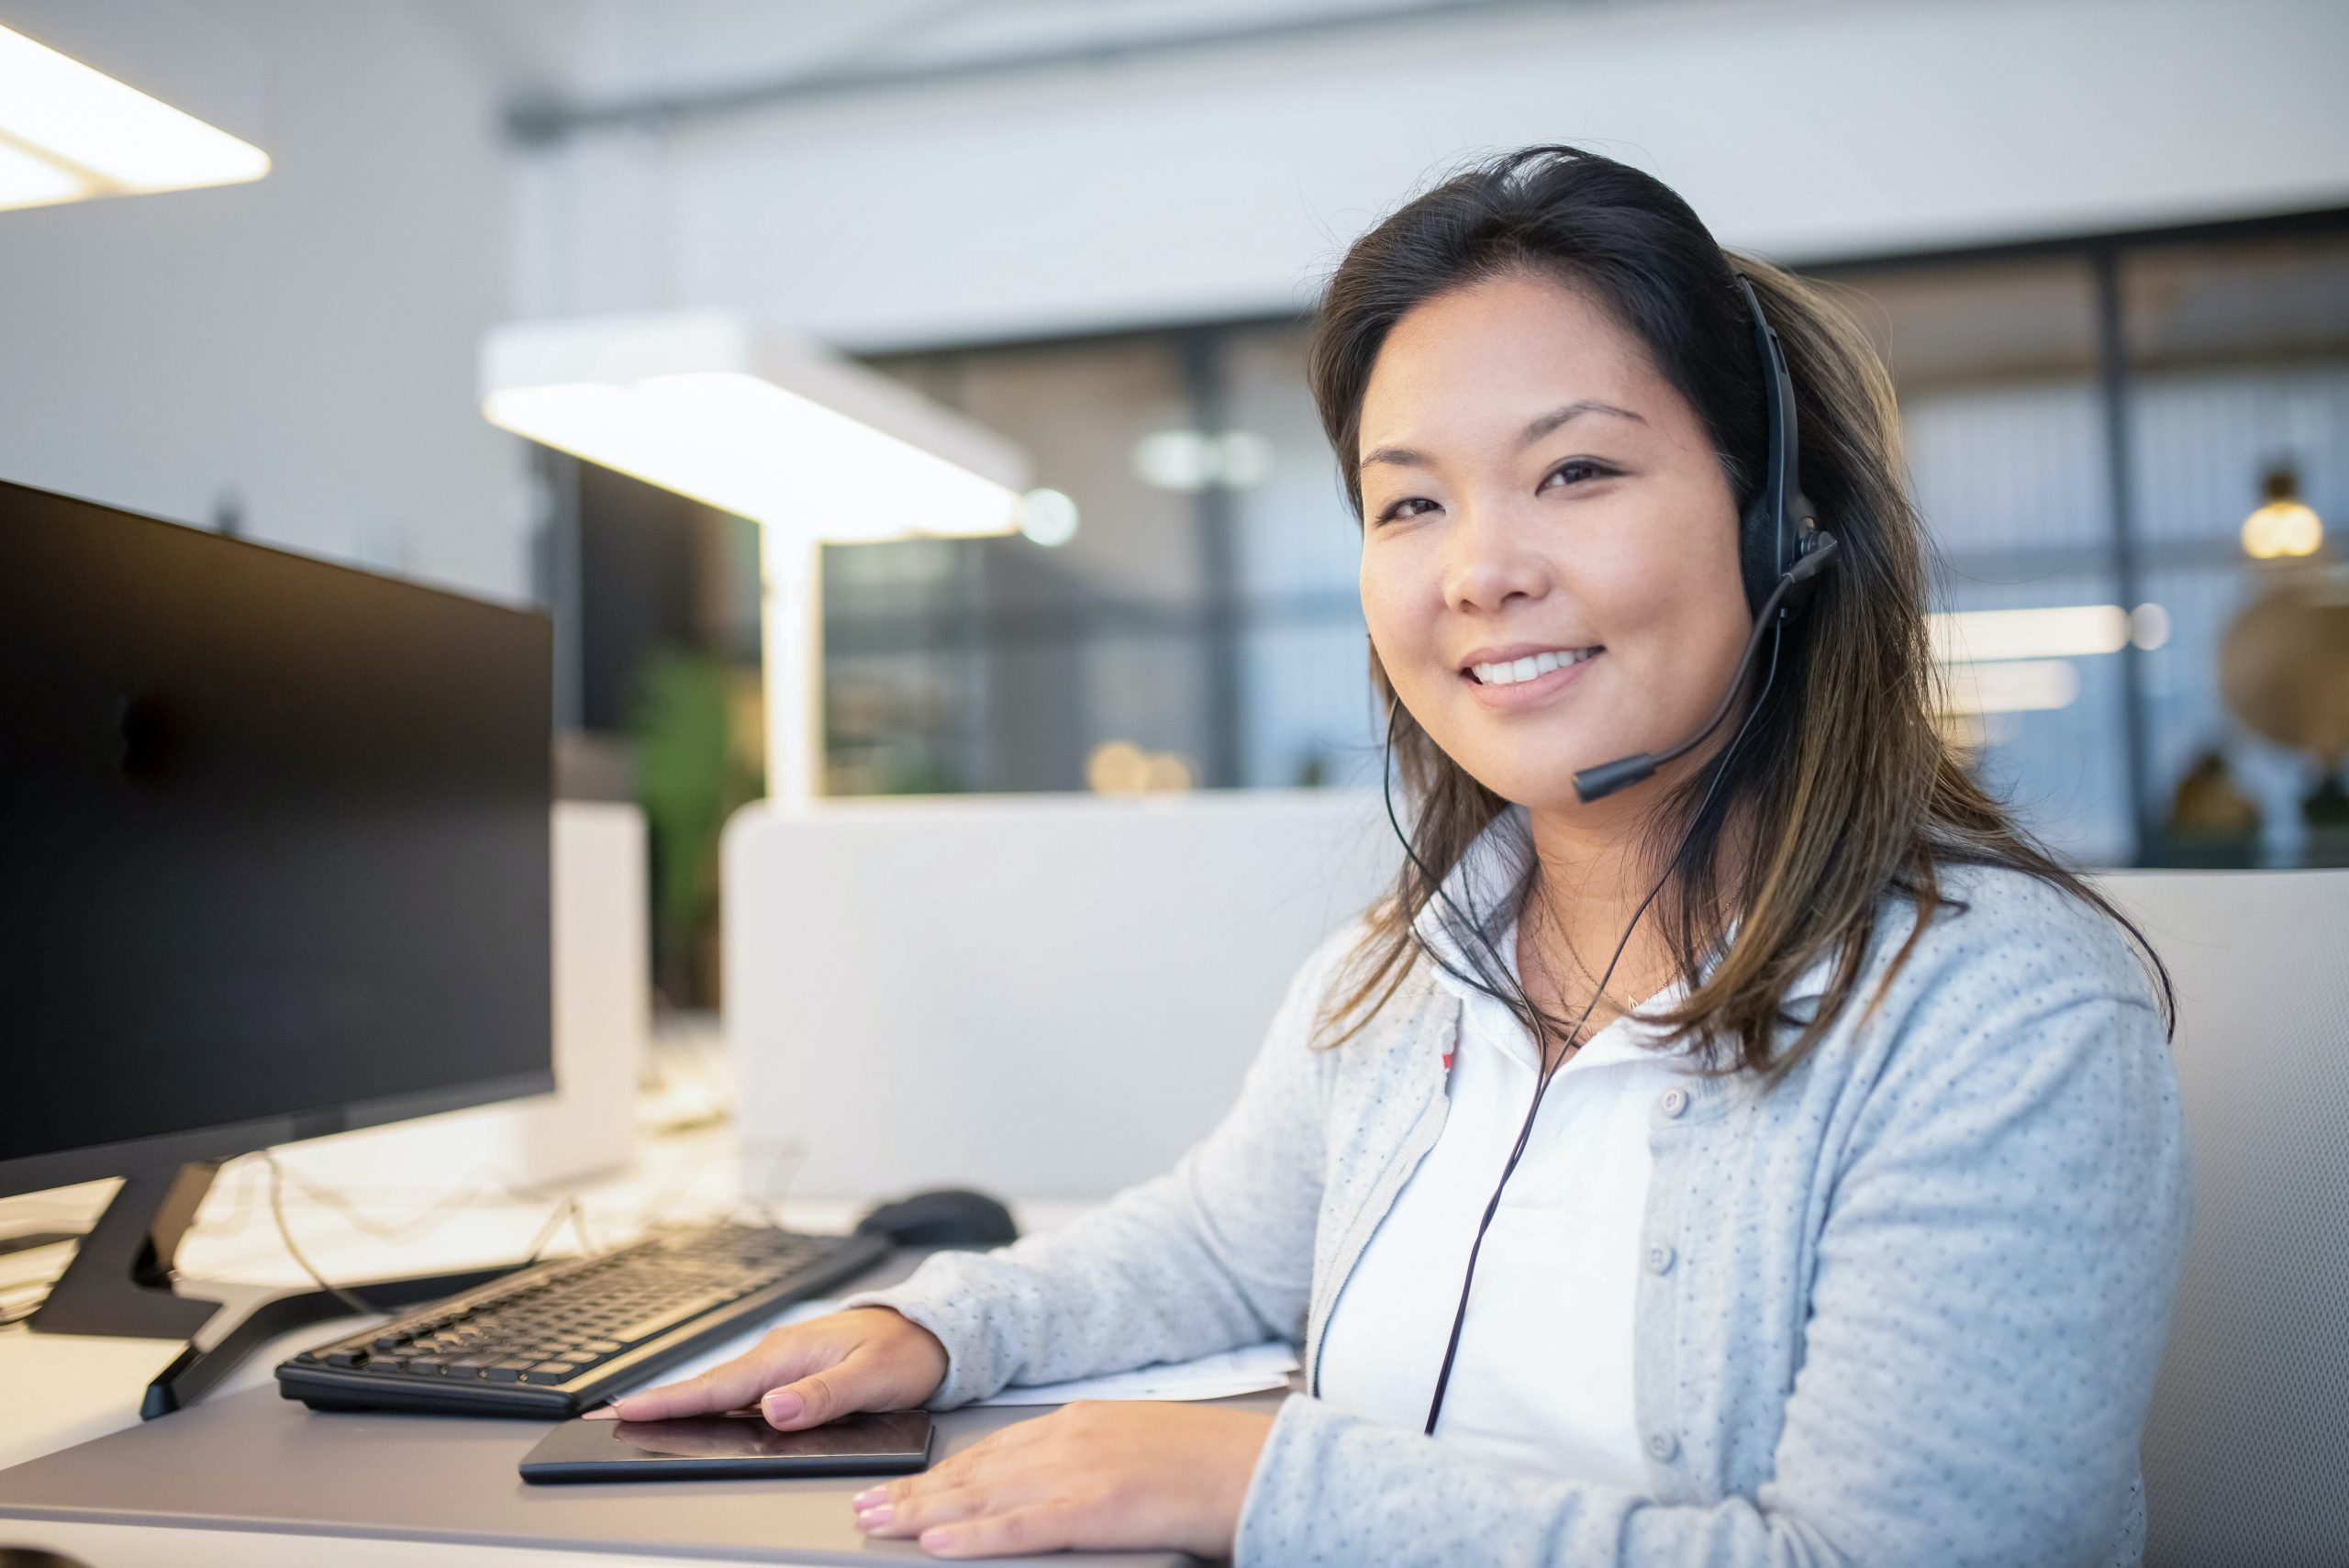 Customer service agent sitting at computer with headset